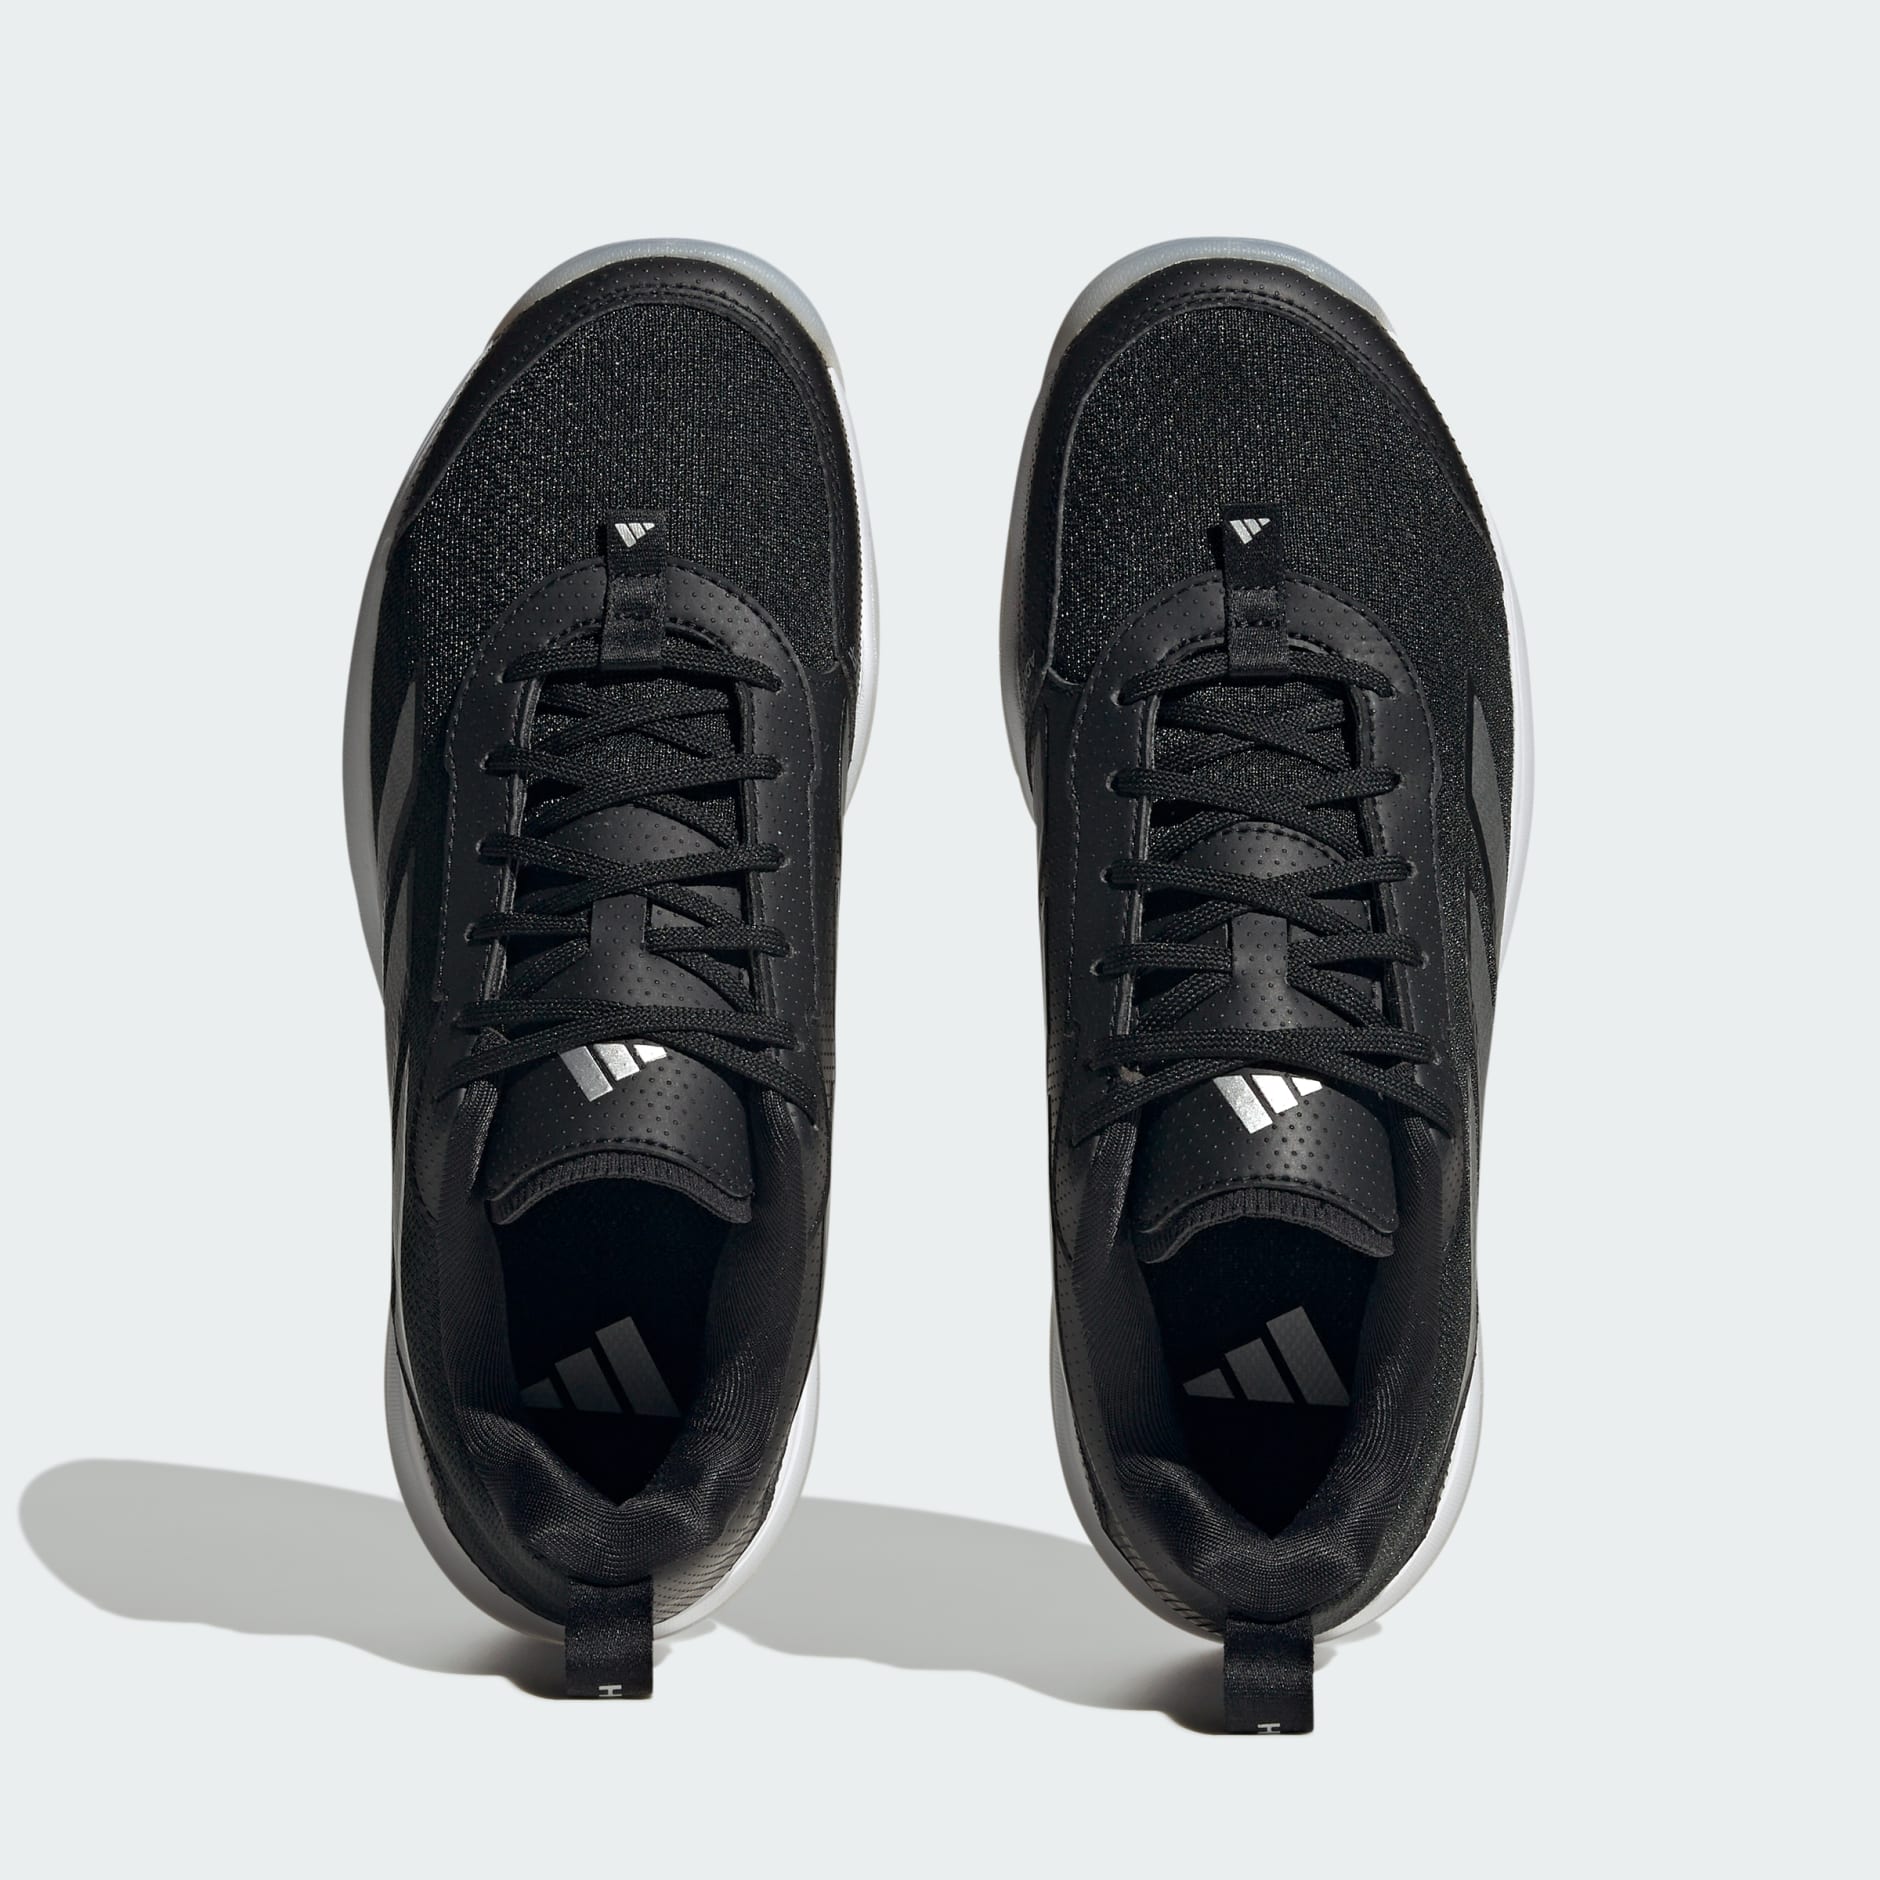 Shoes - Avaflash Low Tennis Shoes - Black | adidas South Africa